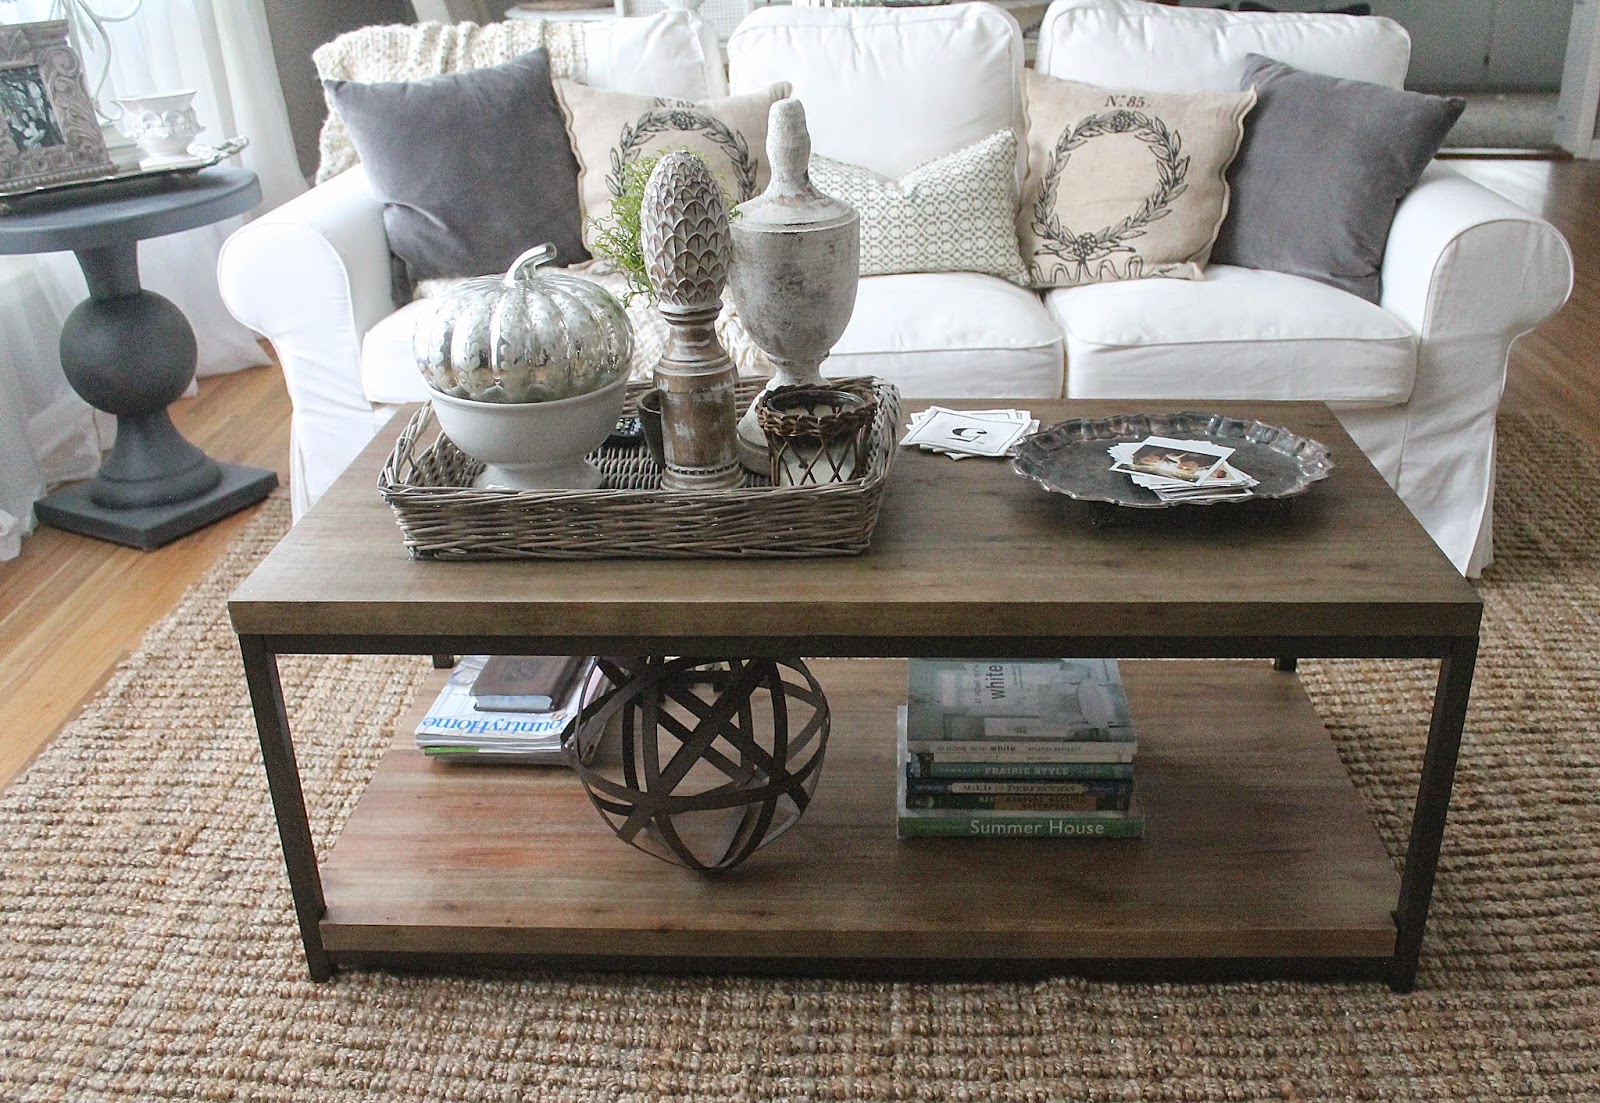 12th and White: 3 Ways to Style a Coffee Table